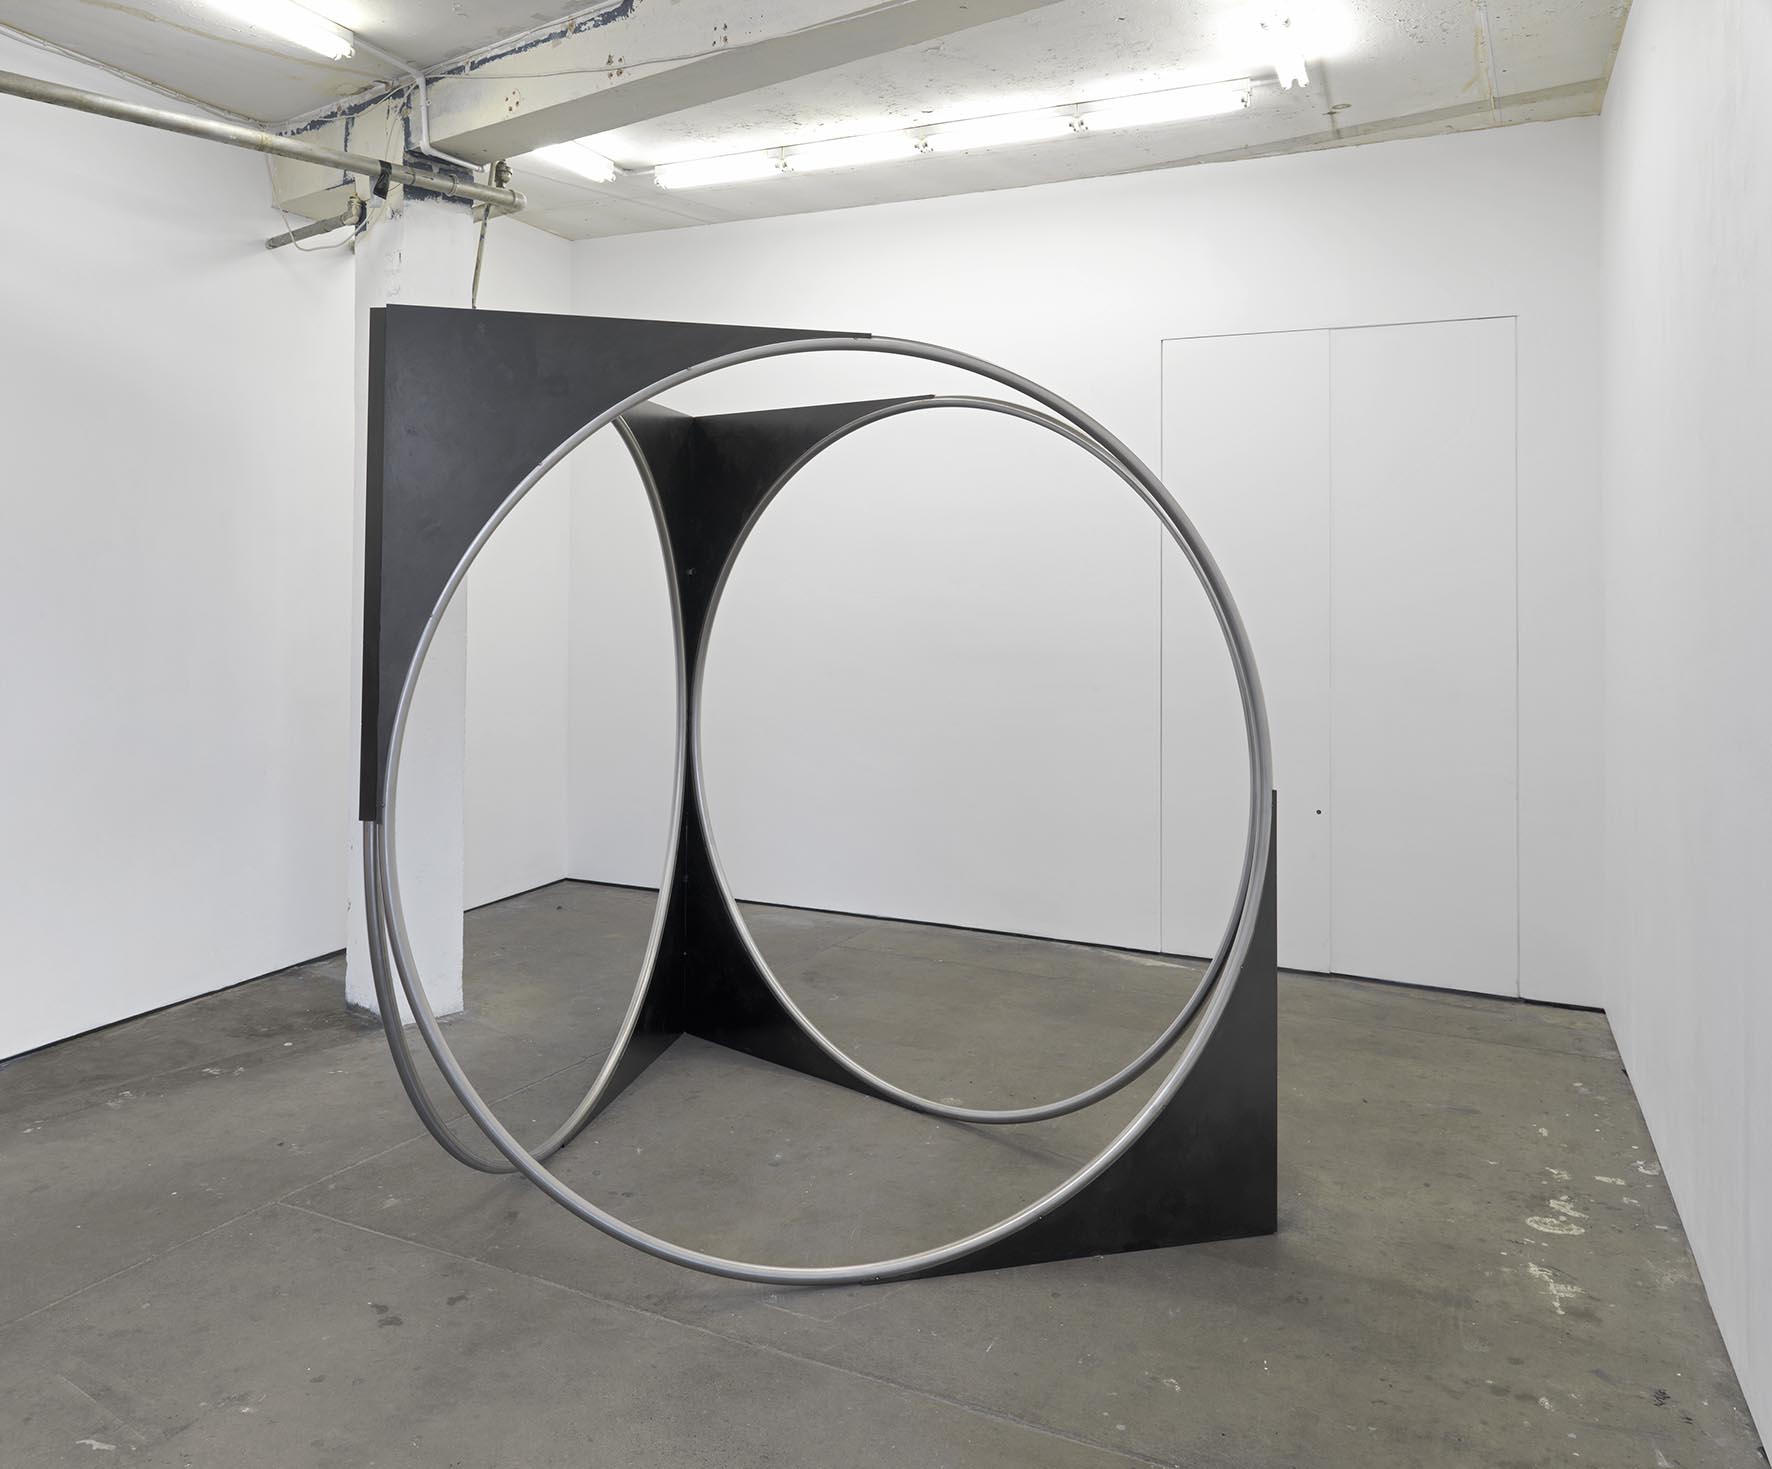     Spa 2008 stainless steel and patinated mild steel 215 x 215 x 190 cm 